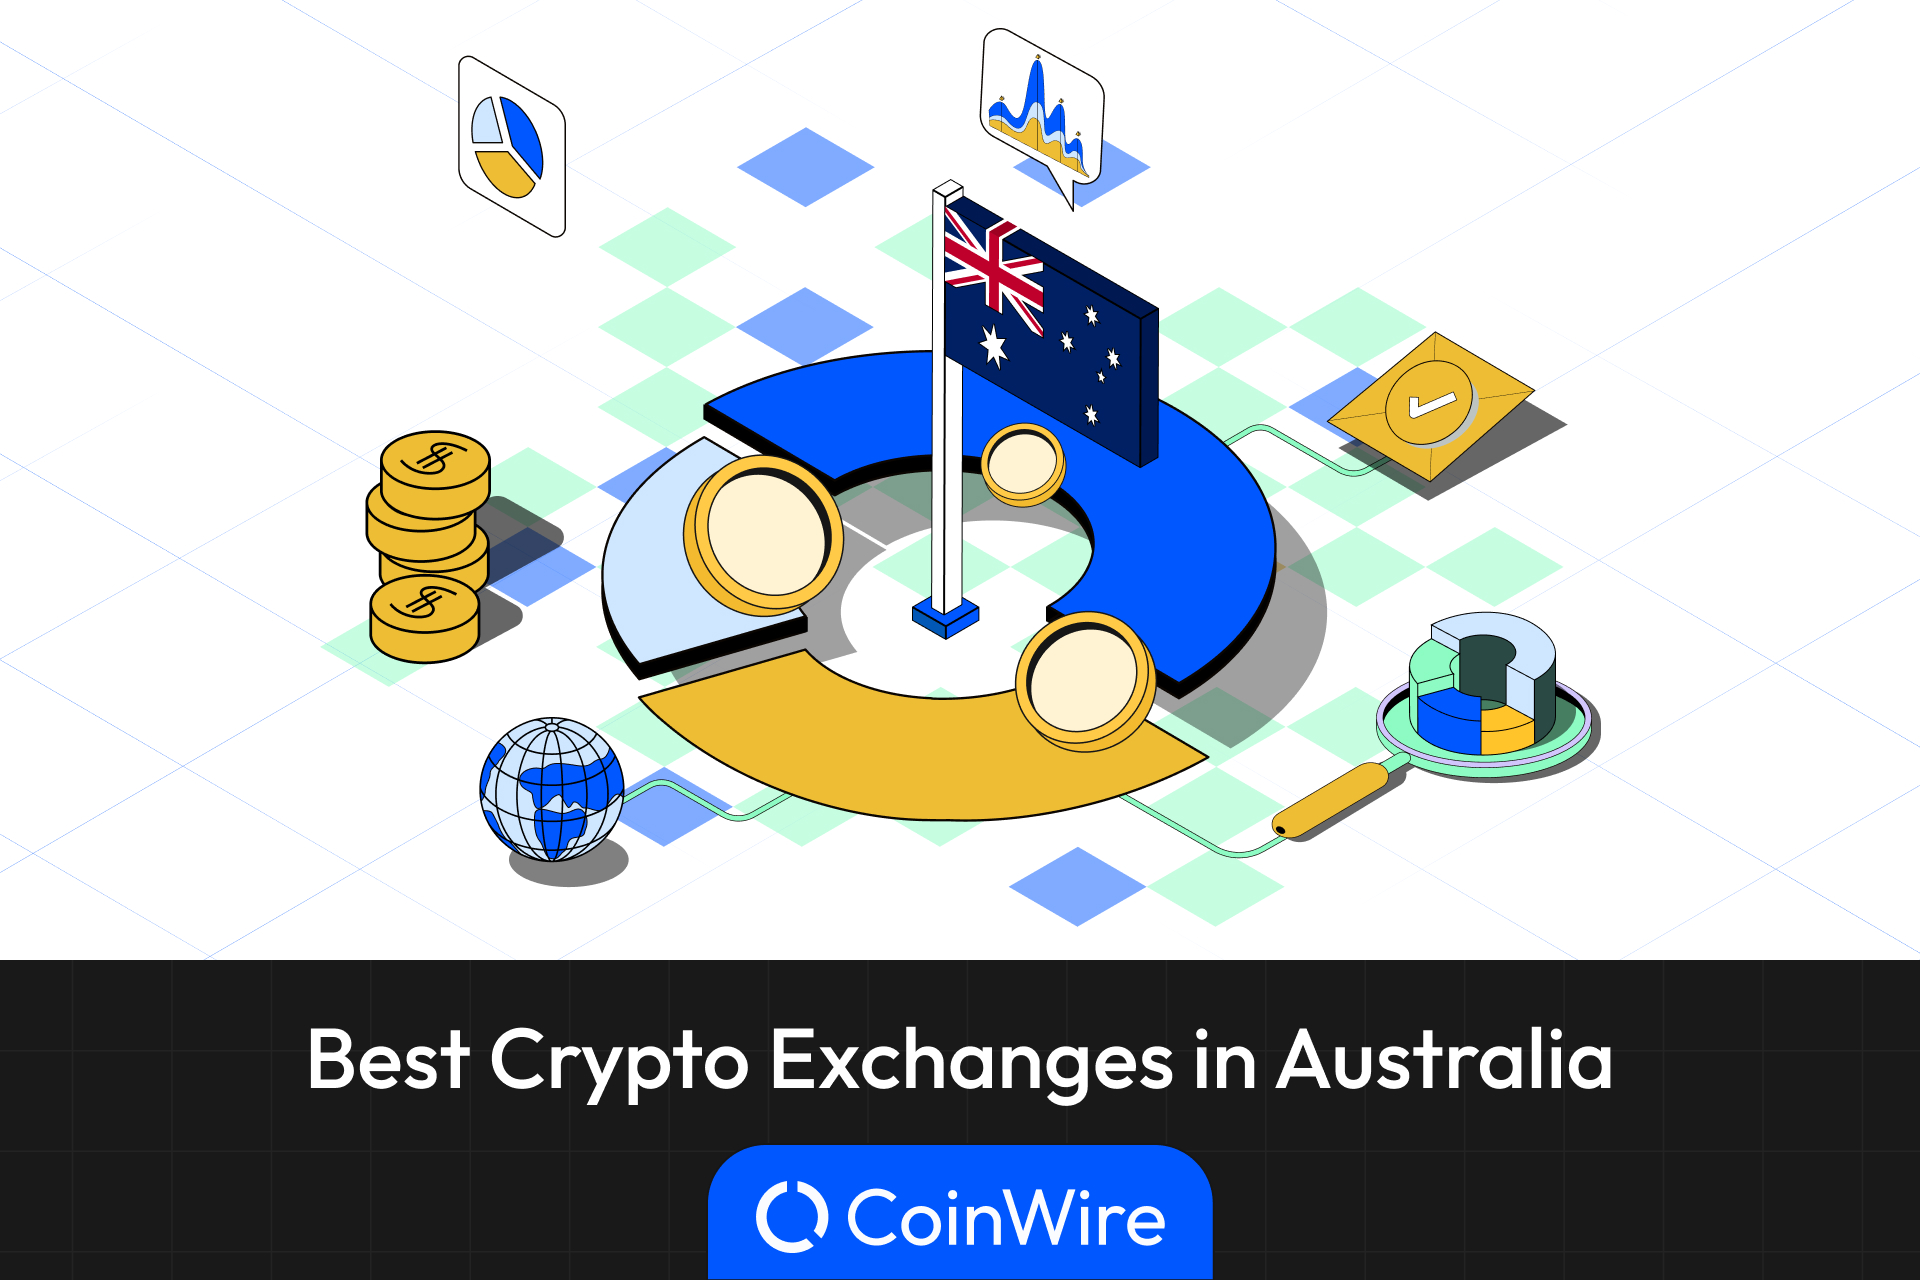 Best crypto exchanges and apps in Australia - Financial Spectrum